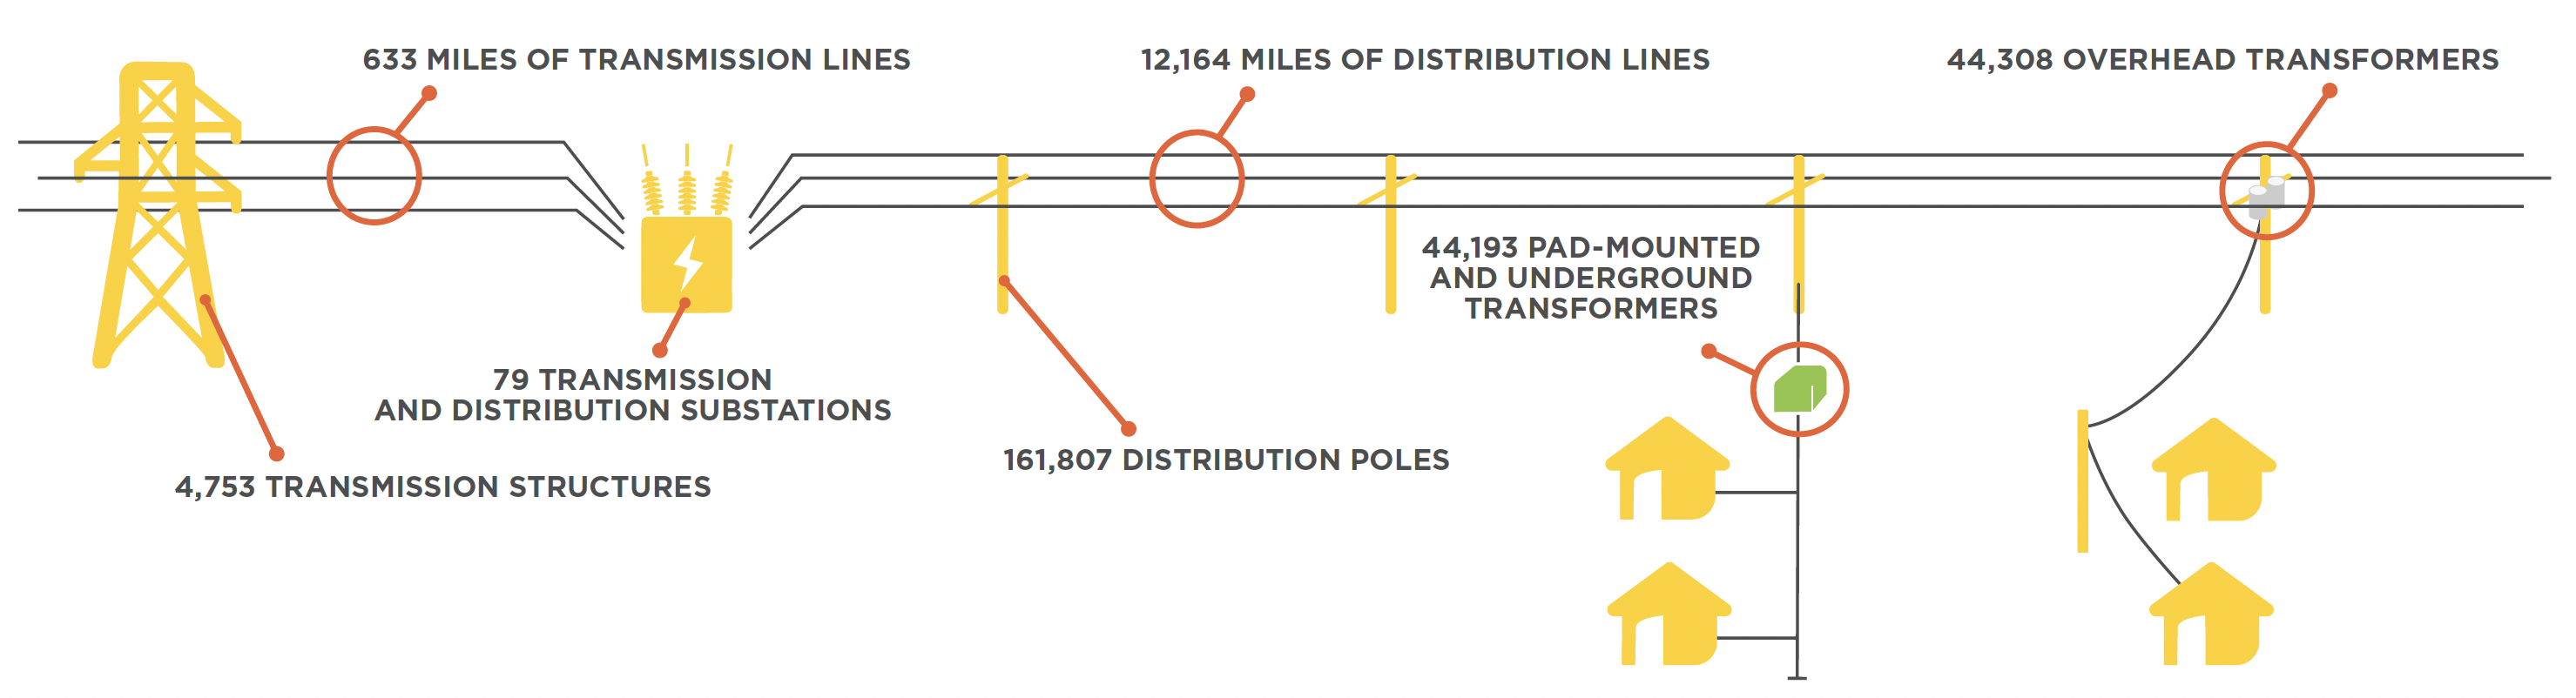 Transmission and Distribution Structure; 6333 Miles of Transmission Lines; 12,164 Miles of Distribution Lines; 44,309 Overhead Transformers; 4,753 Transmission Structures; 79 Transmissions and Distribution Substations; 141,807 Distribution Poles; 44,193 Pad-mounted and Underground Transformers